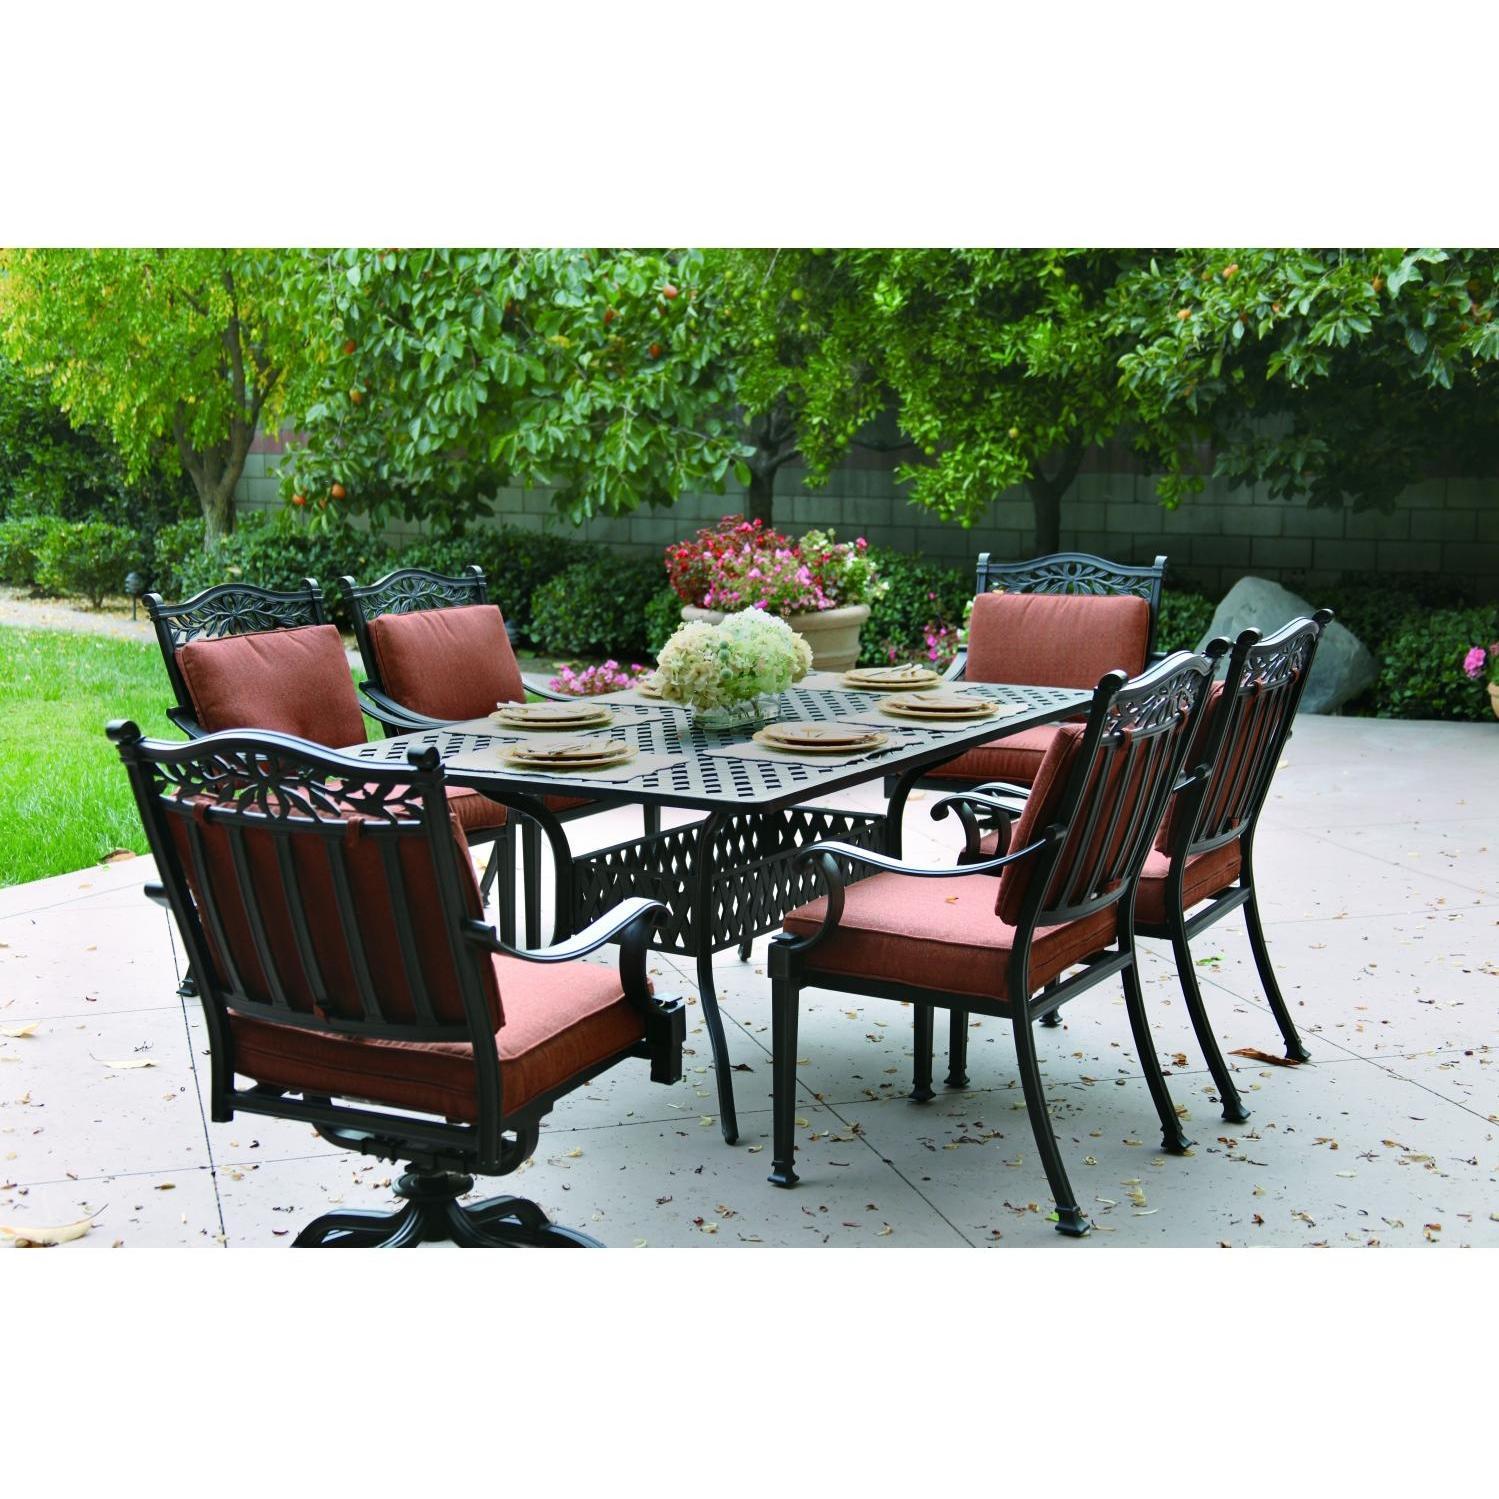 patio dining sets photo - 6